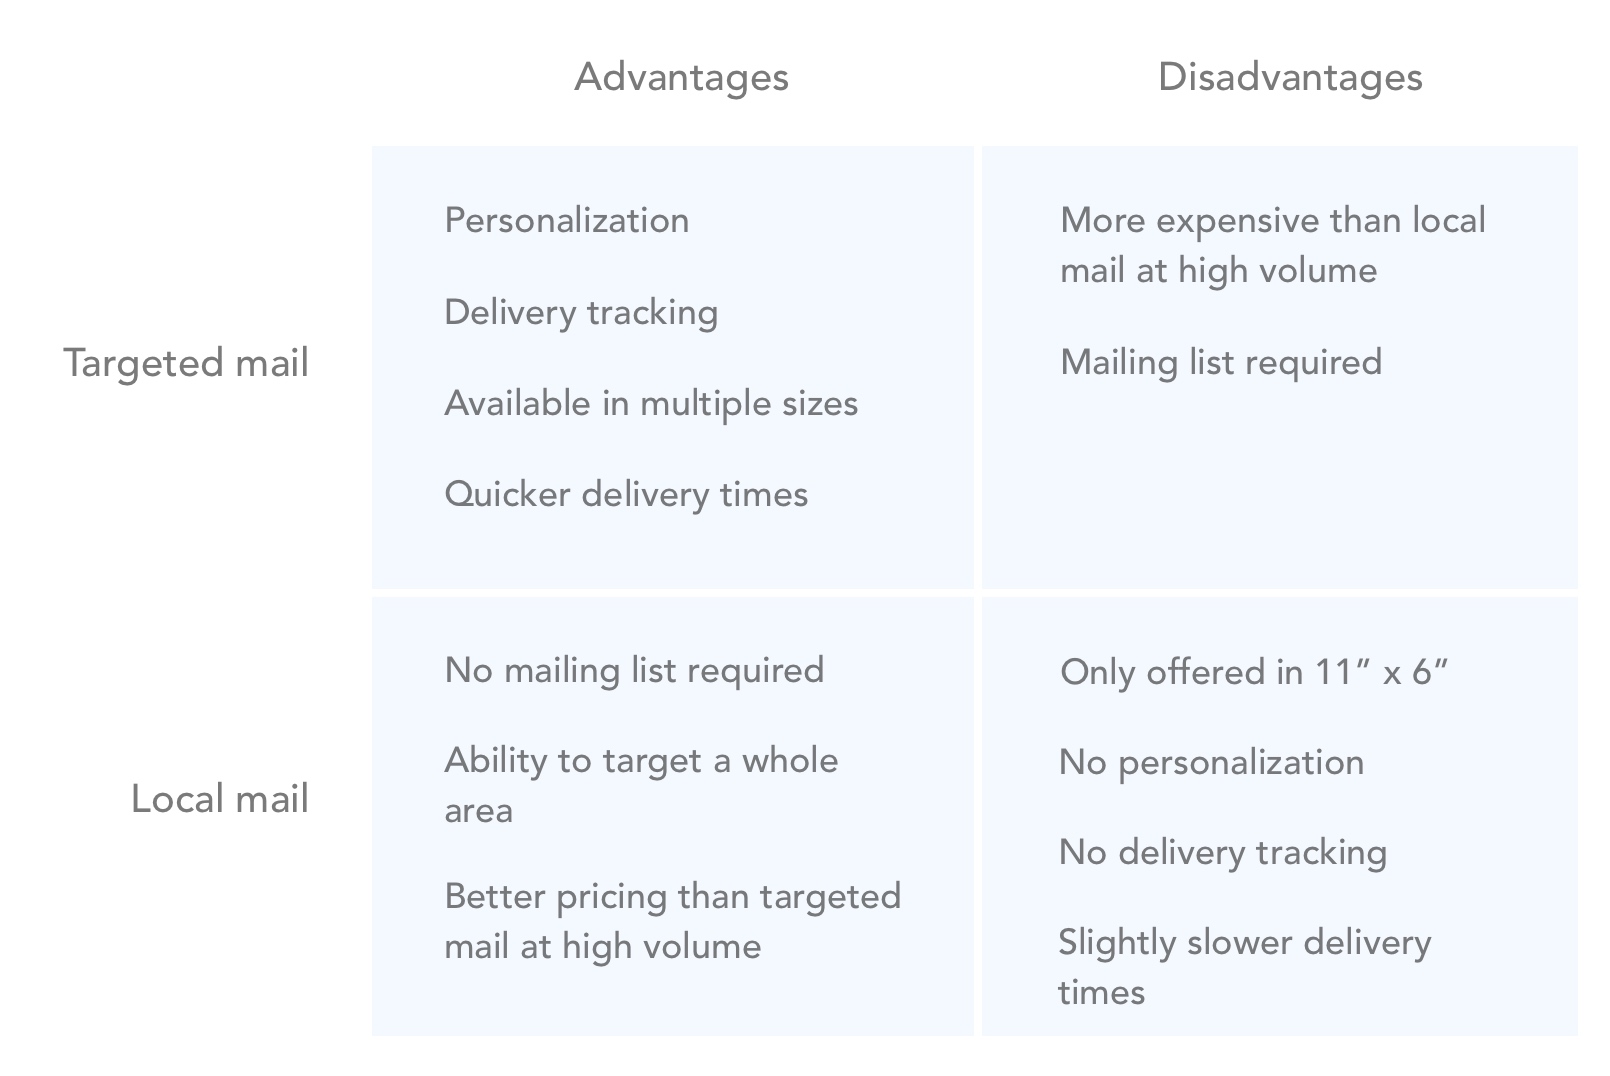 Targeted direct mail vs local mail